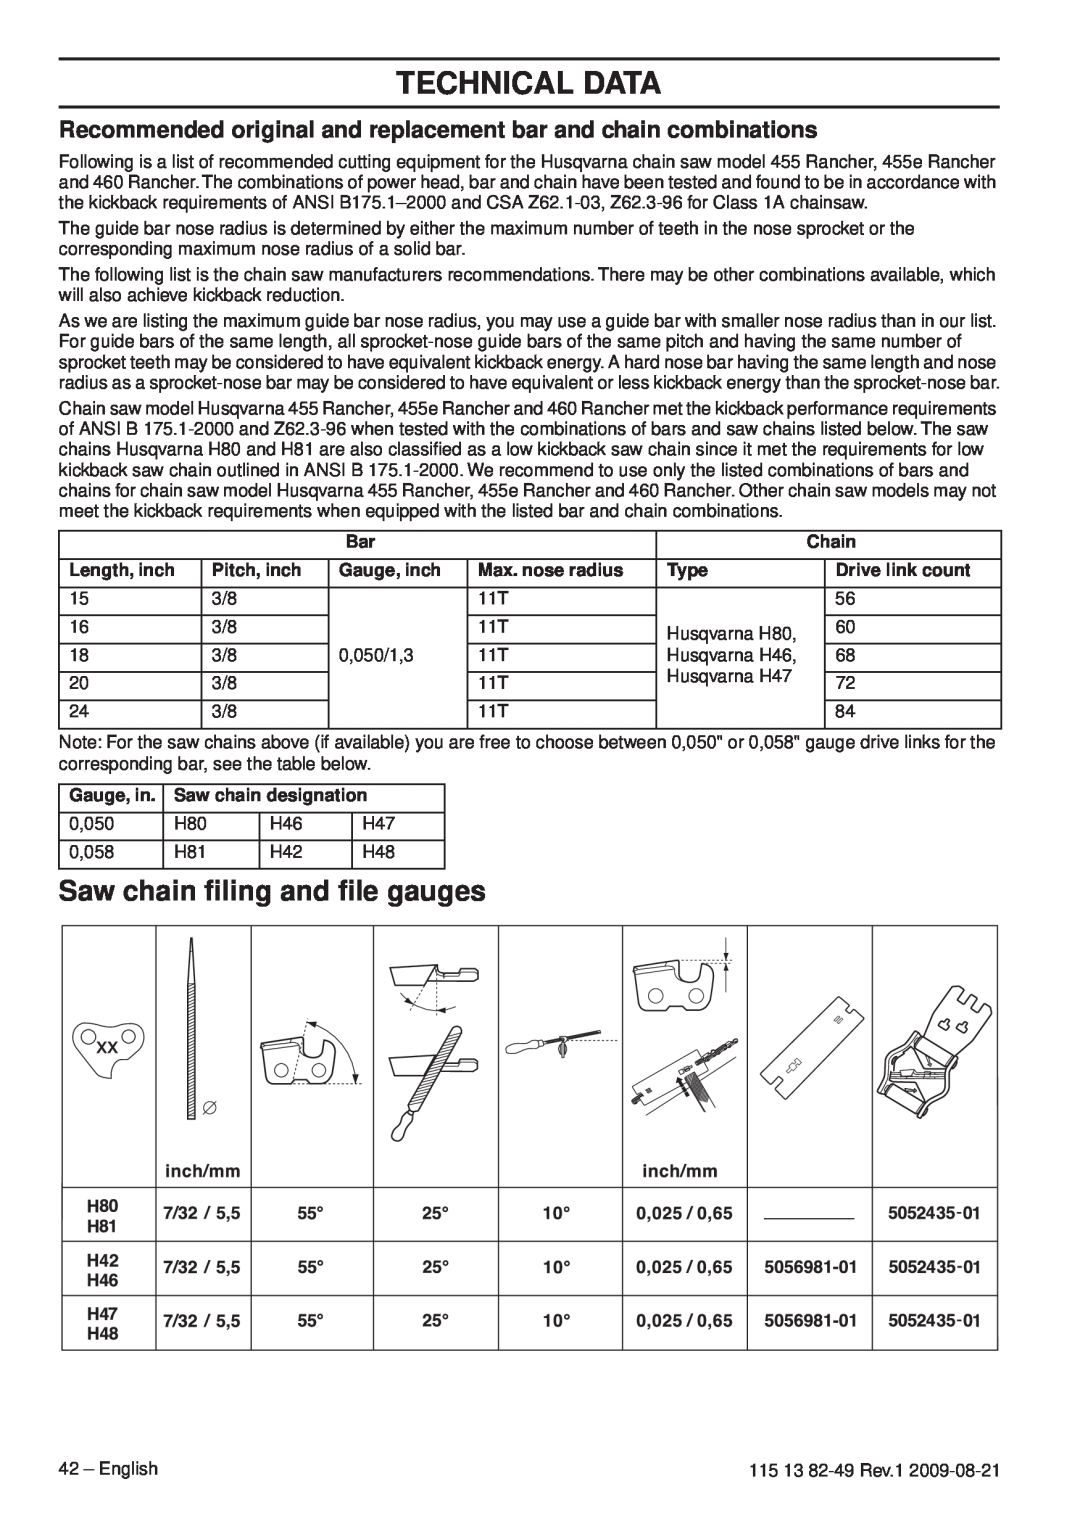 Husqvarna 115 13 82-49 Saw chain ﬁling and ﬁle gauges, Recommended original and replacement bar and chain combinations 